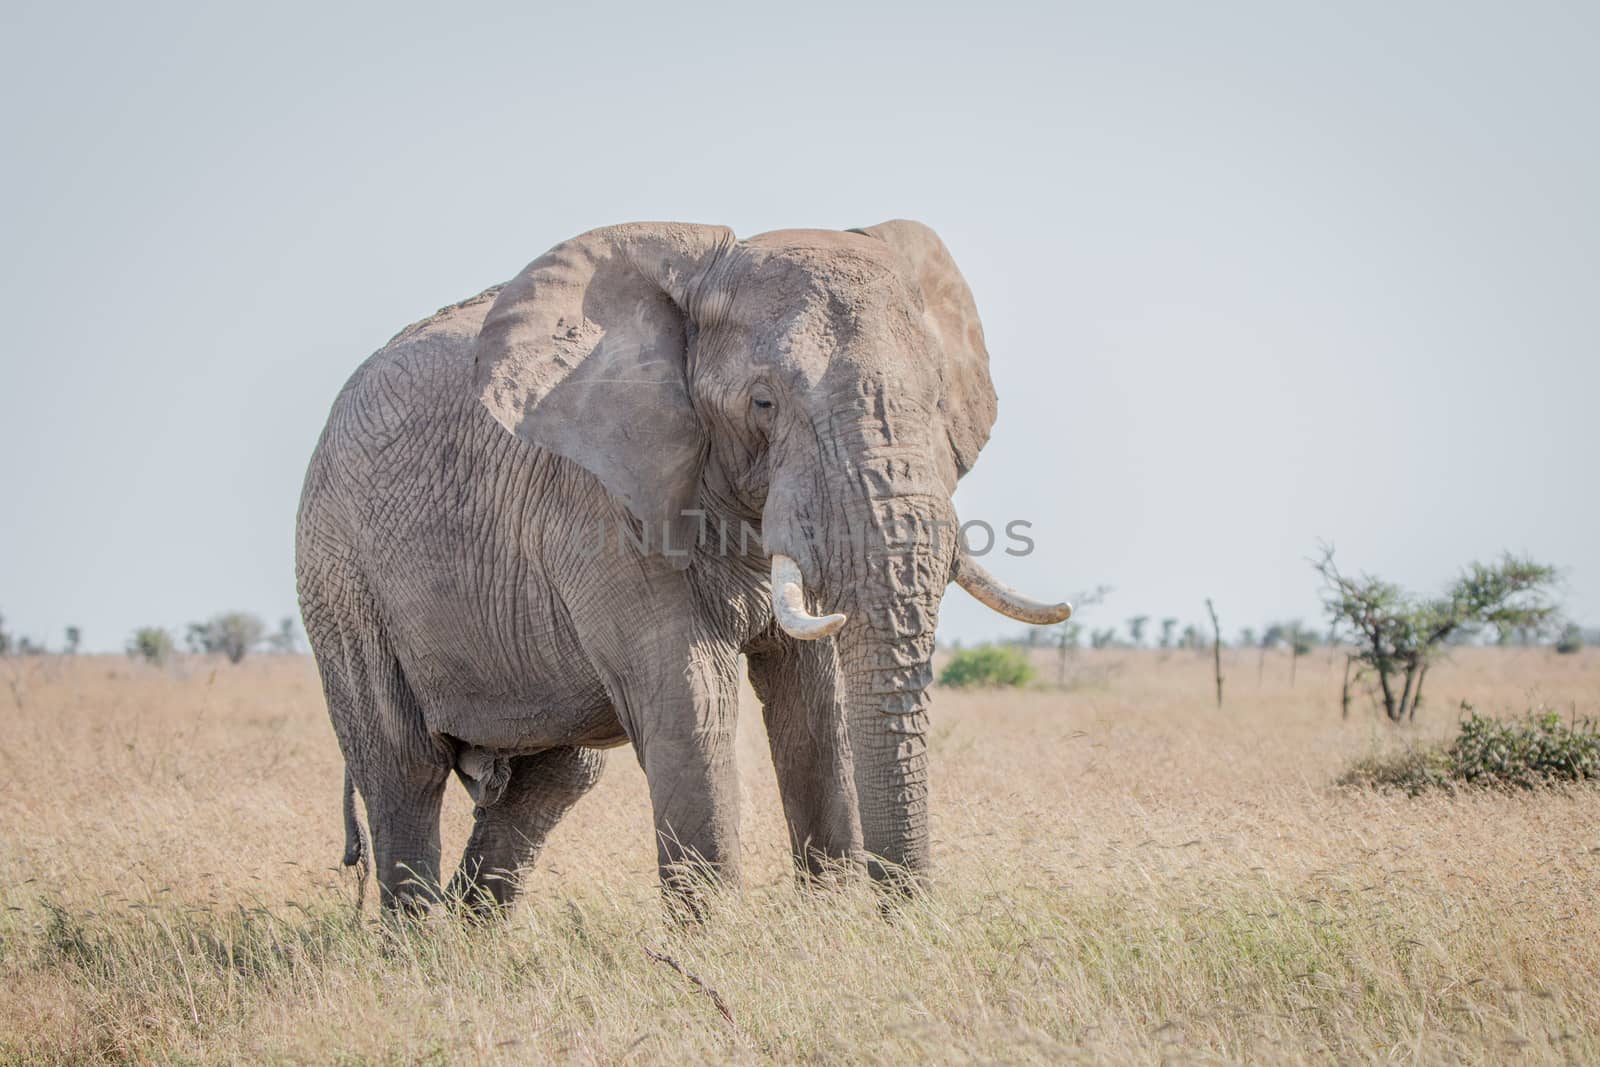 Elephant in the grass in the Kruger National Park, South Africa.